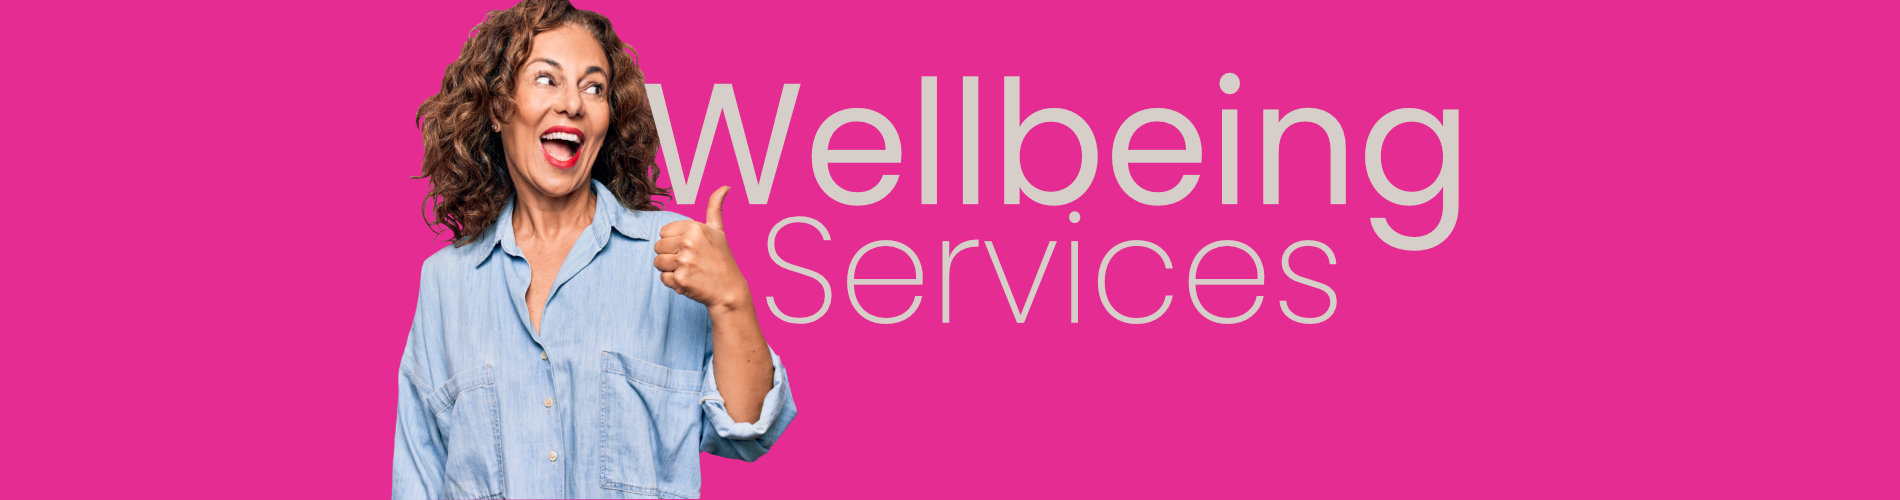 A woman with curly hair smiling and signing thumbs up with the words 'wellbeing services' 